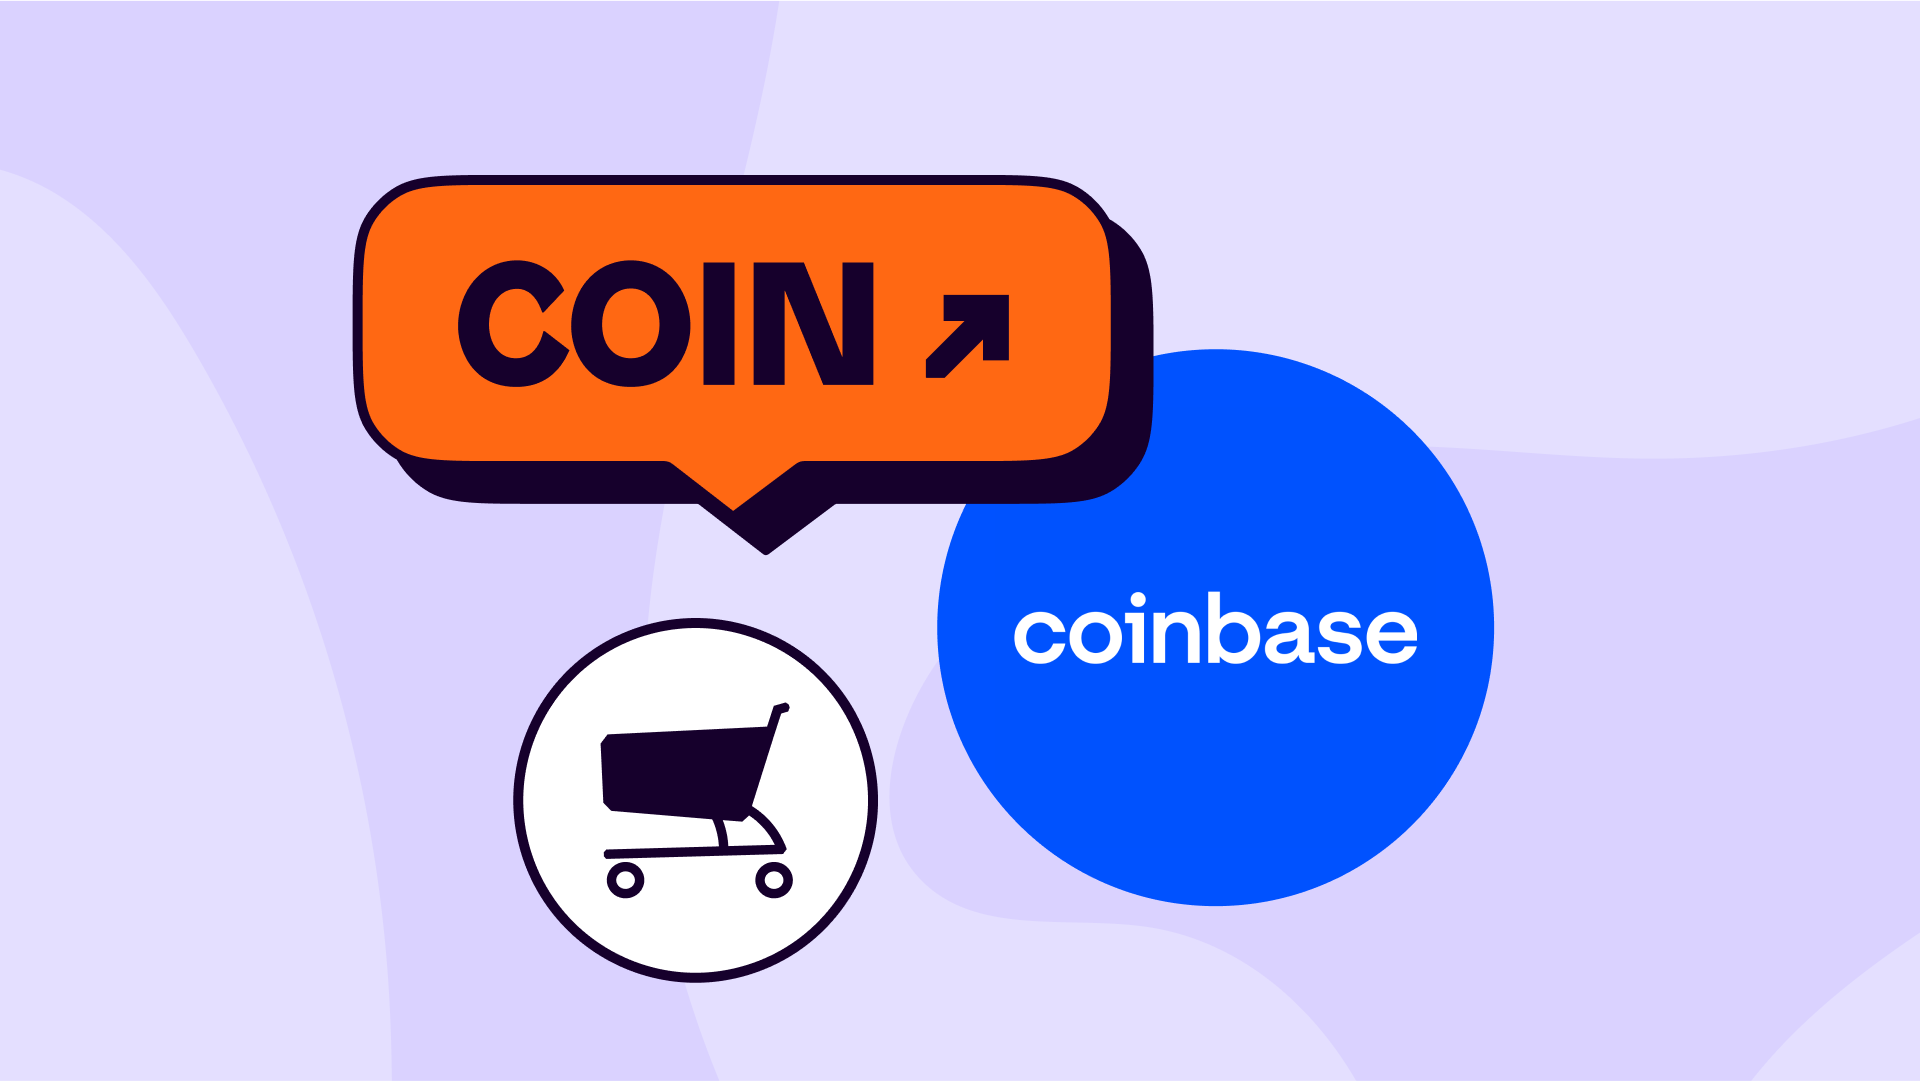 How to buy Coinbase shares